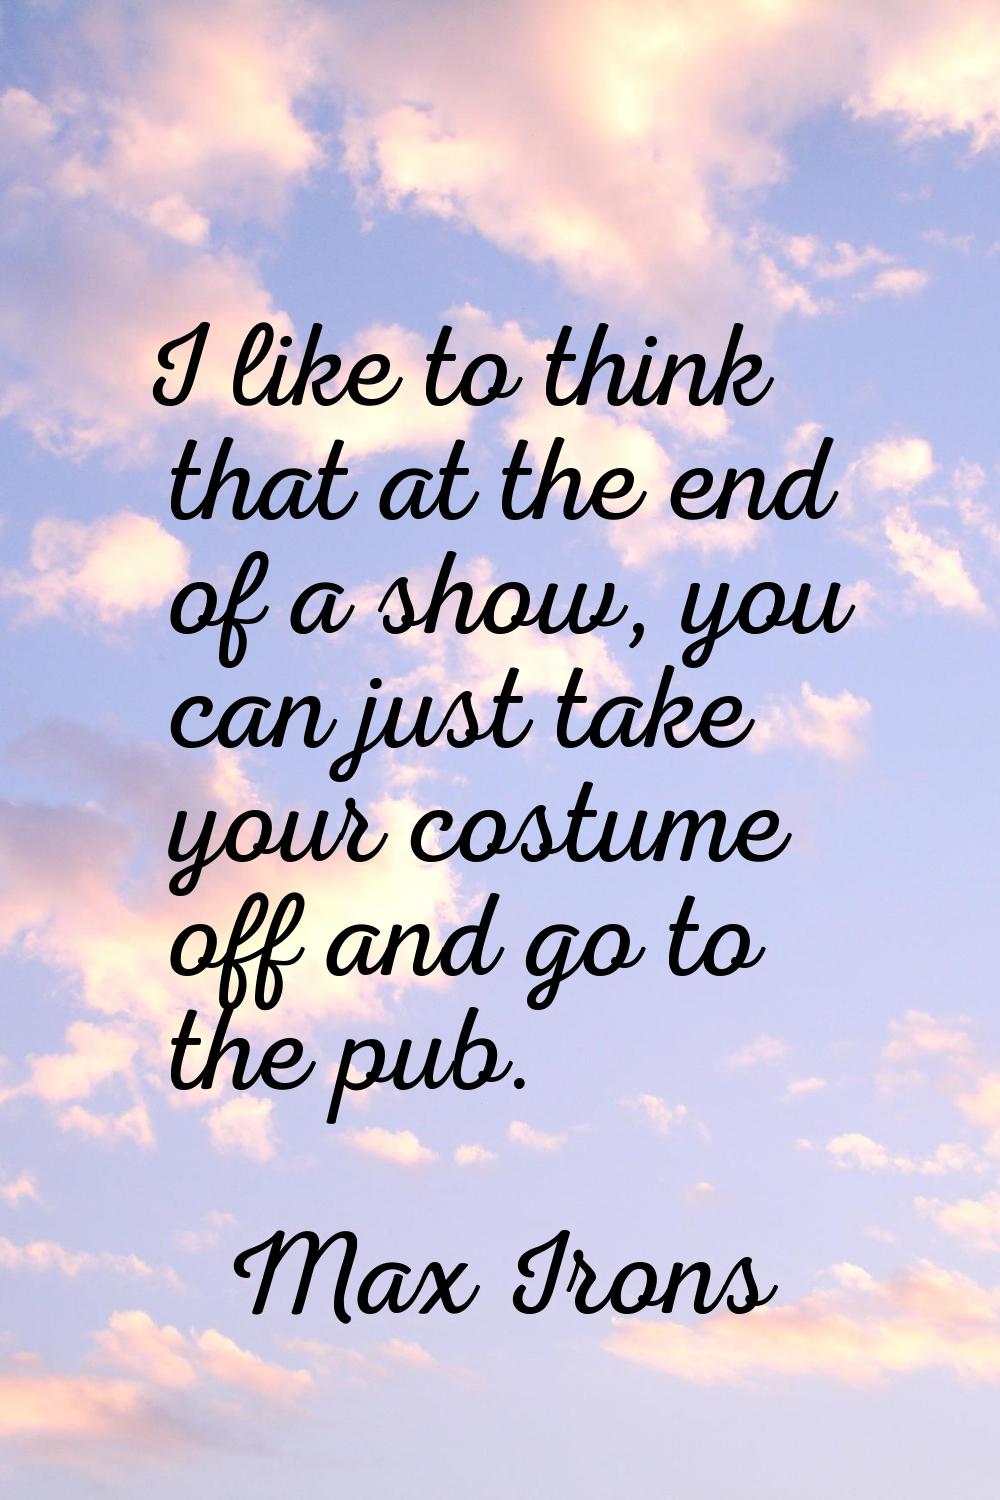 I like to think that at the end of a show, you can just take your costume off and go to the pub.